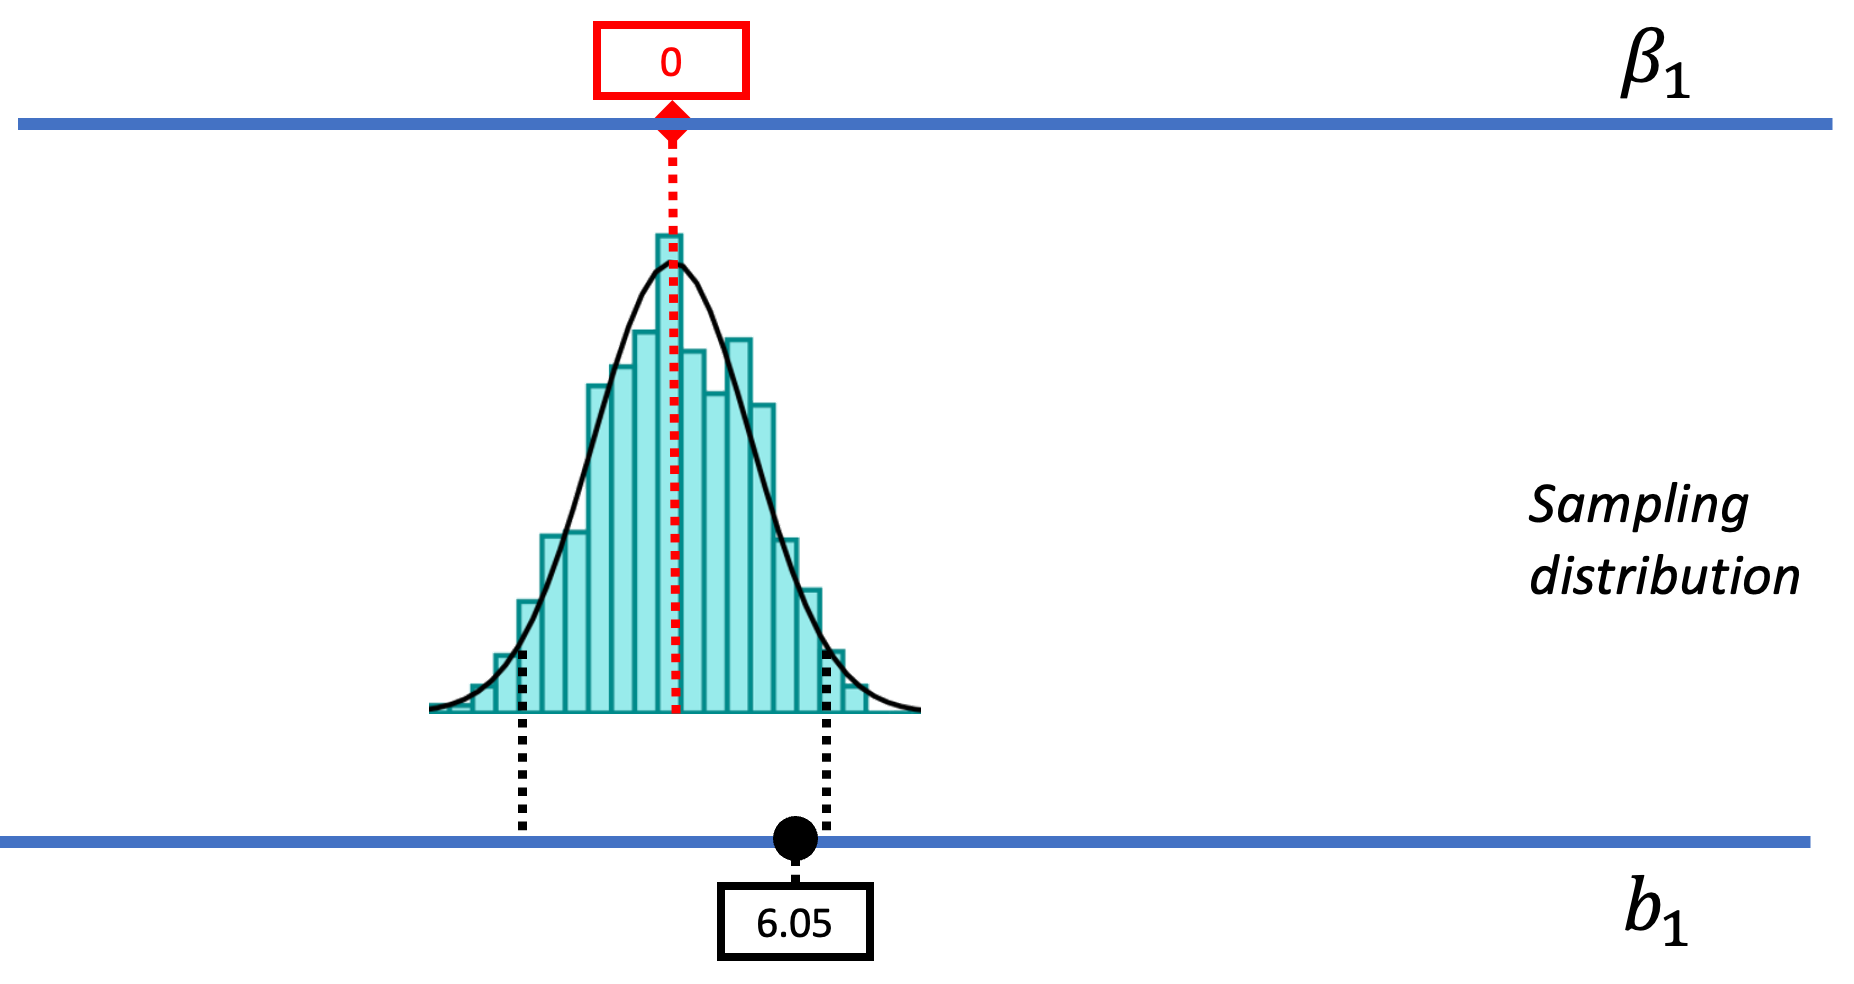 The DGP of beta_1 = 0 shown generating a sampling distribution of b1s. The sample b1 is within the .95 middle of the sampling distribution.